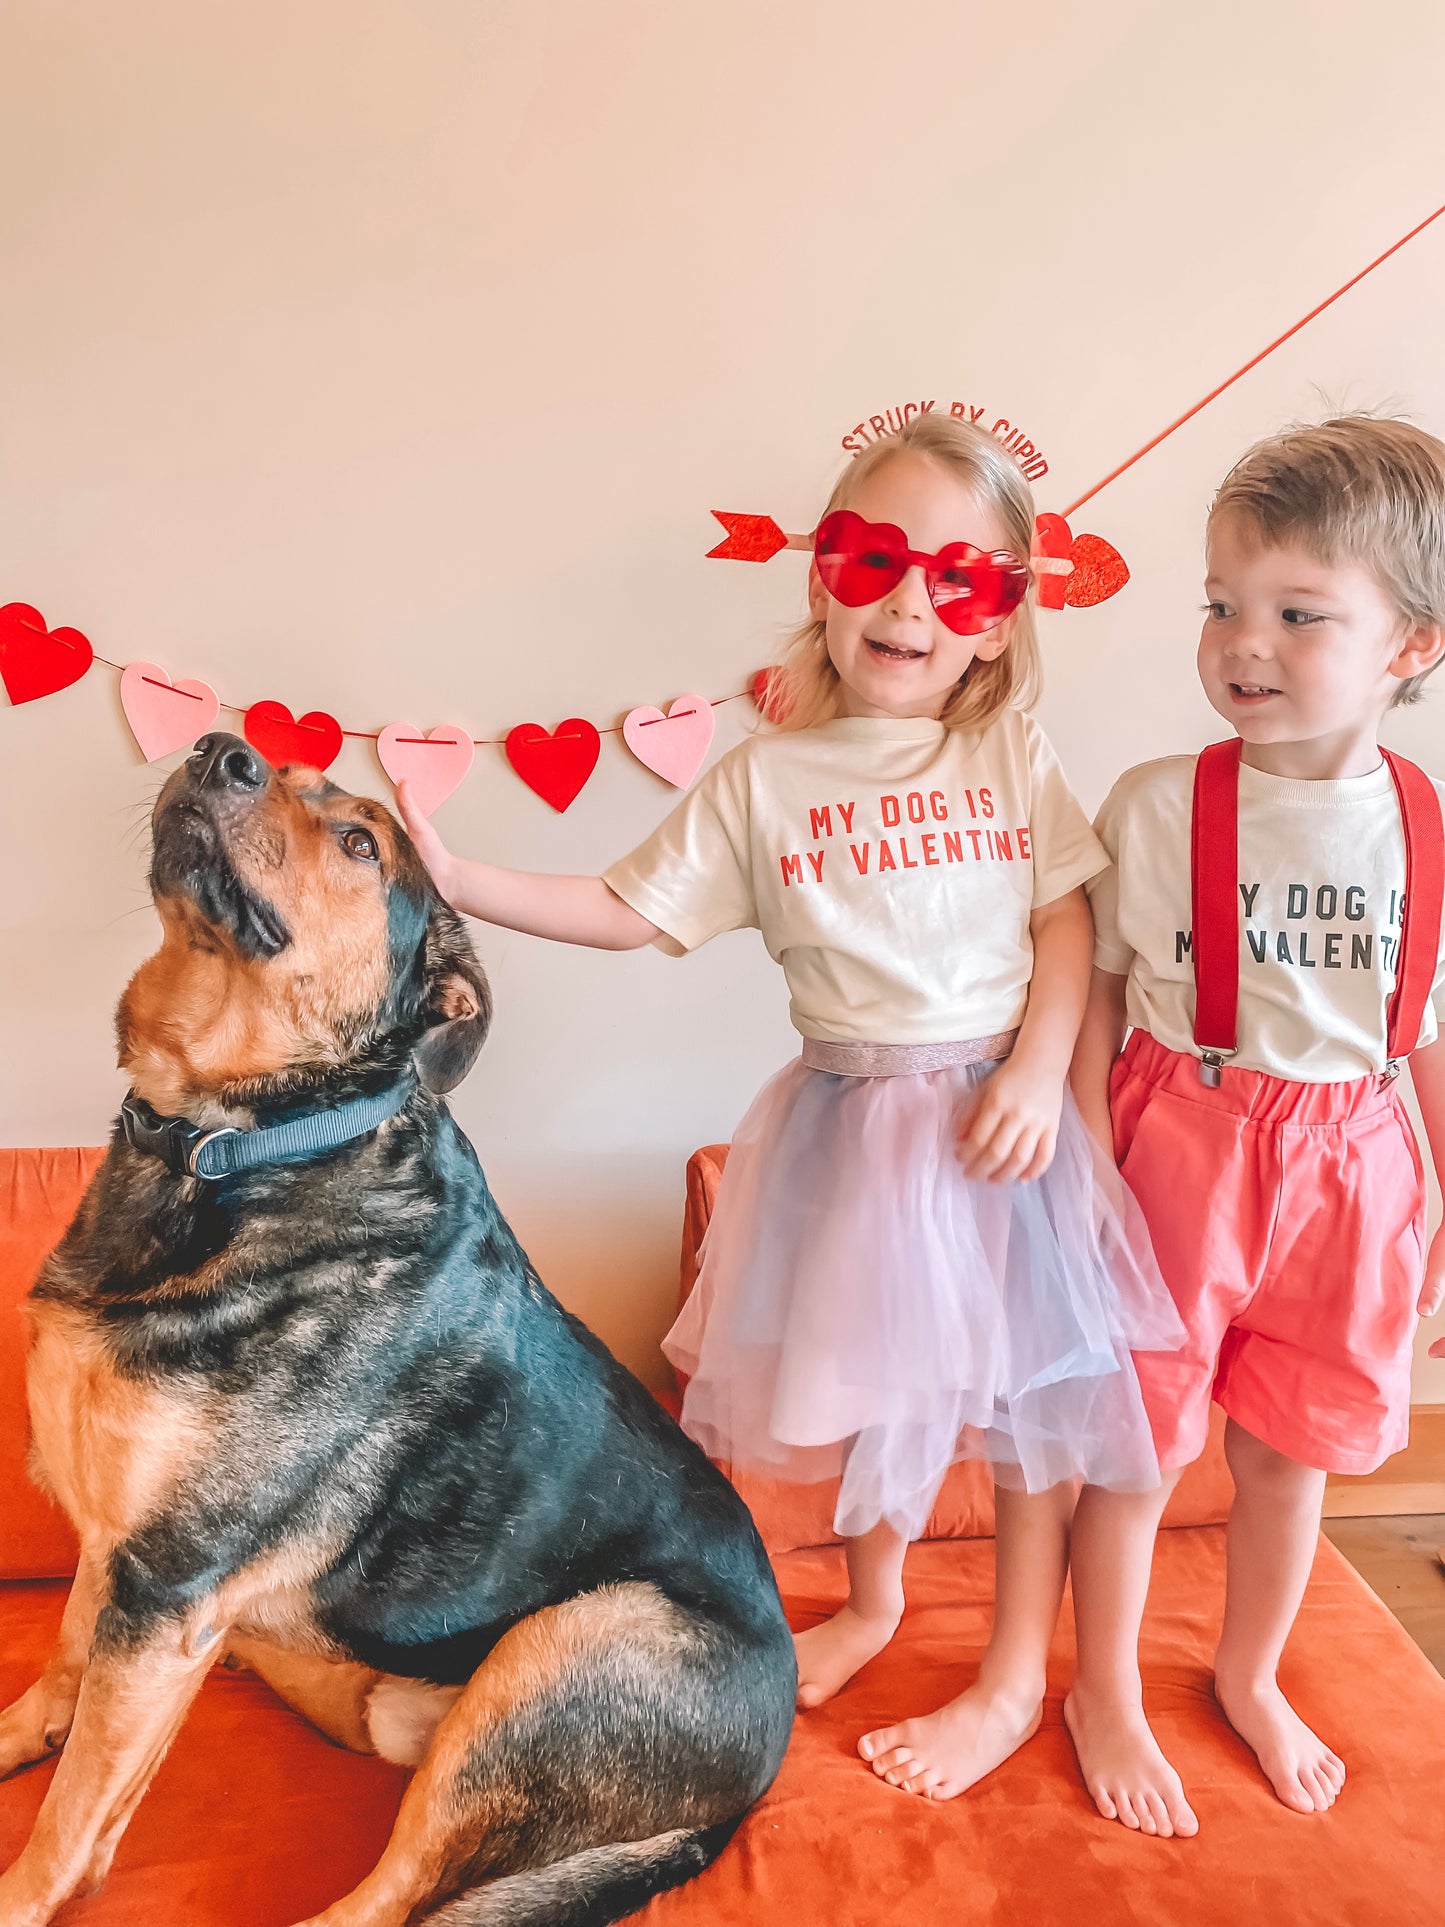 My Dog Is My Valentine (Red) - Kids Tee (Natural)